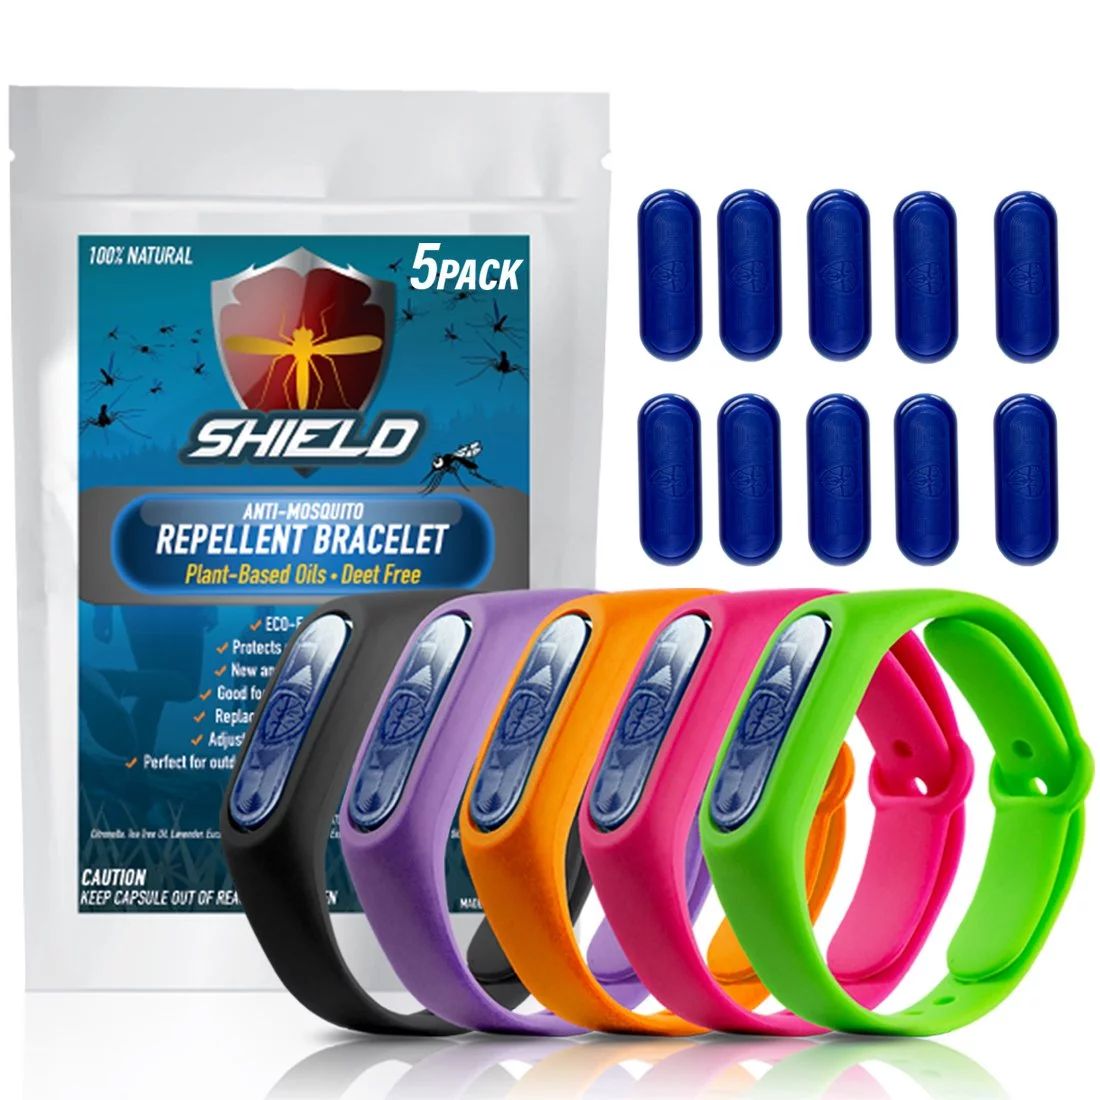 Mosquito Repellent Bracelet Shield Natural Anti Insect & Bug Band | Walmart (US)